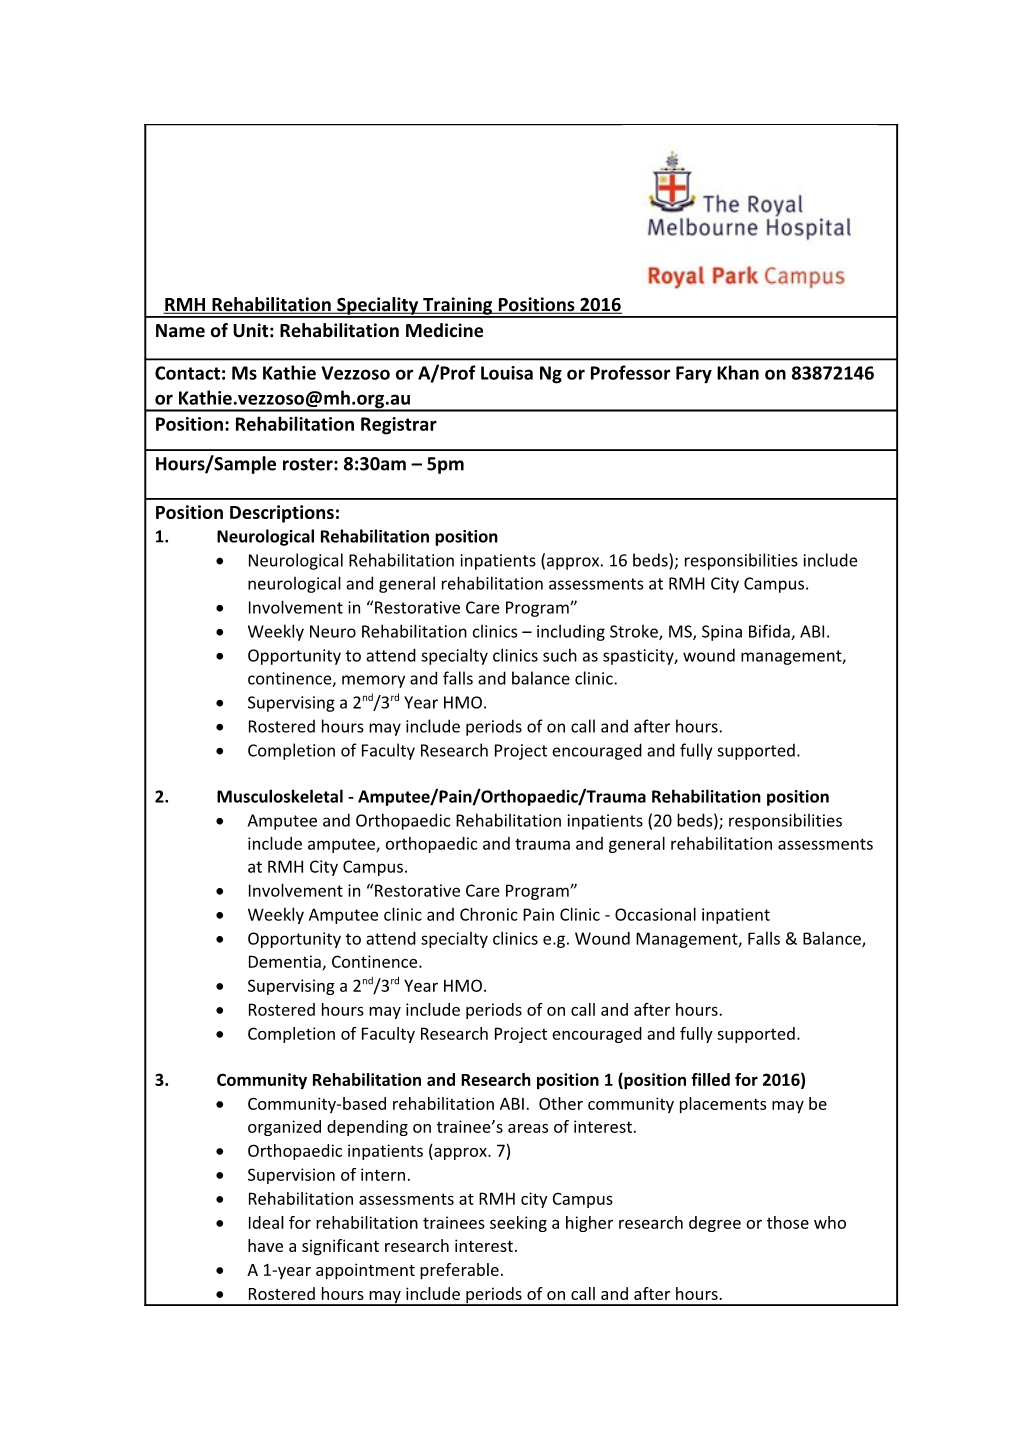 RMH Speciality Positions Pro Forma